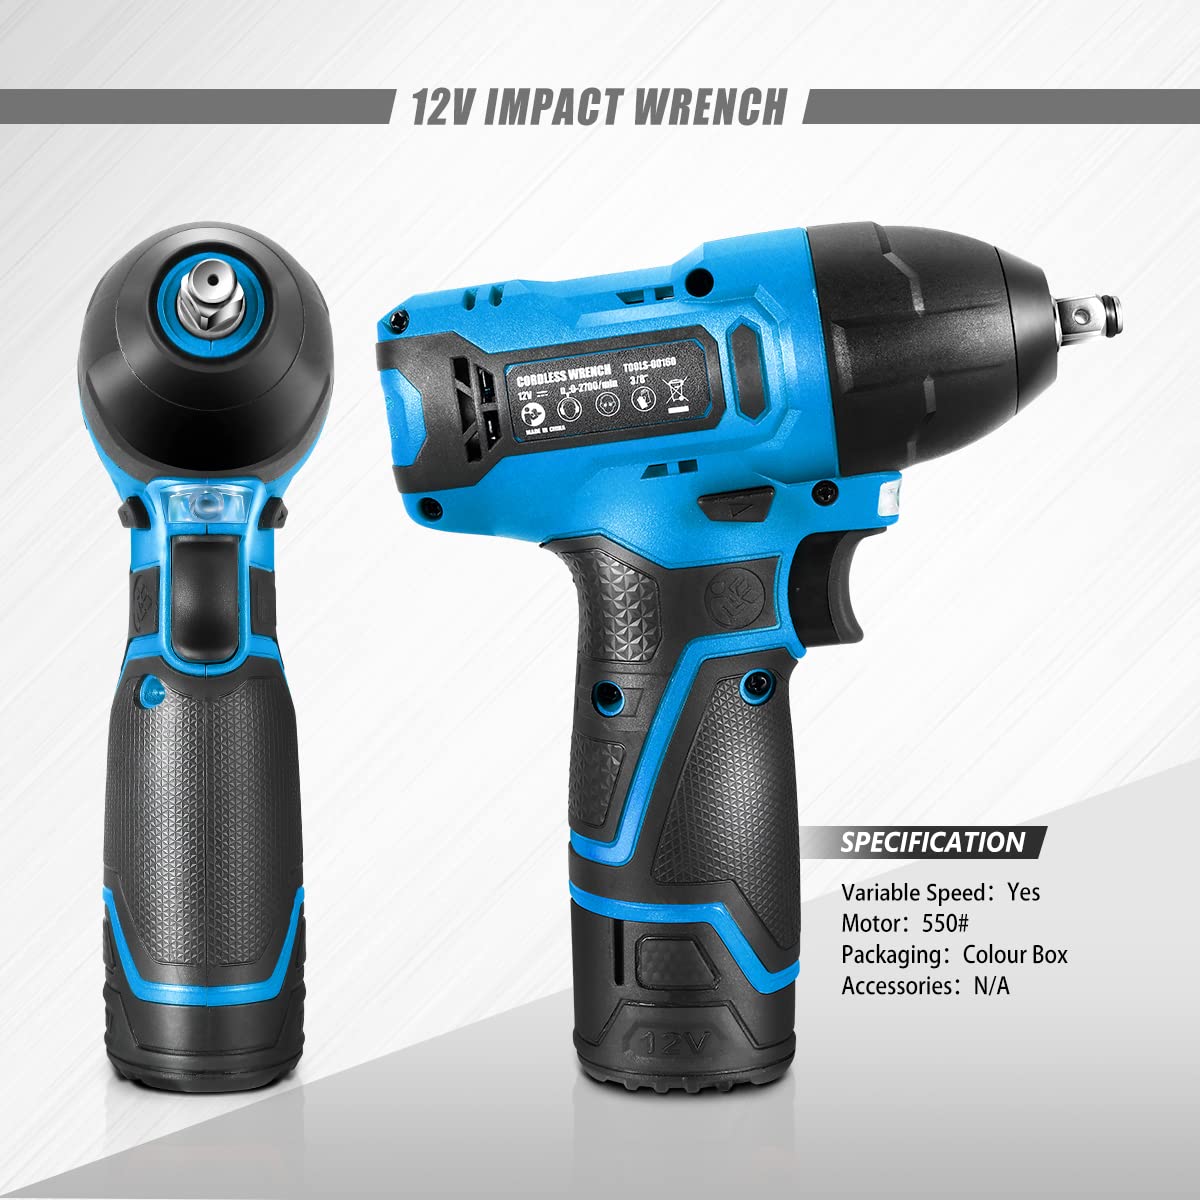 DNA MOTORING TOOLS-00159 Cordless Impact Wrench, 3/8” Chuck Max Torque 120Nm 12V Electric Power Impact Wrench with LED Work Light,Blue (Tool Only)